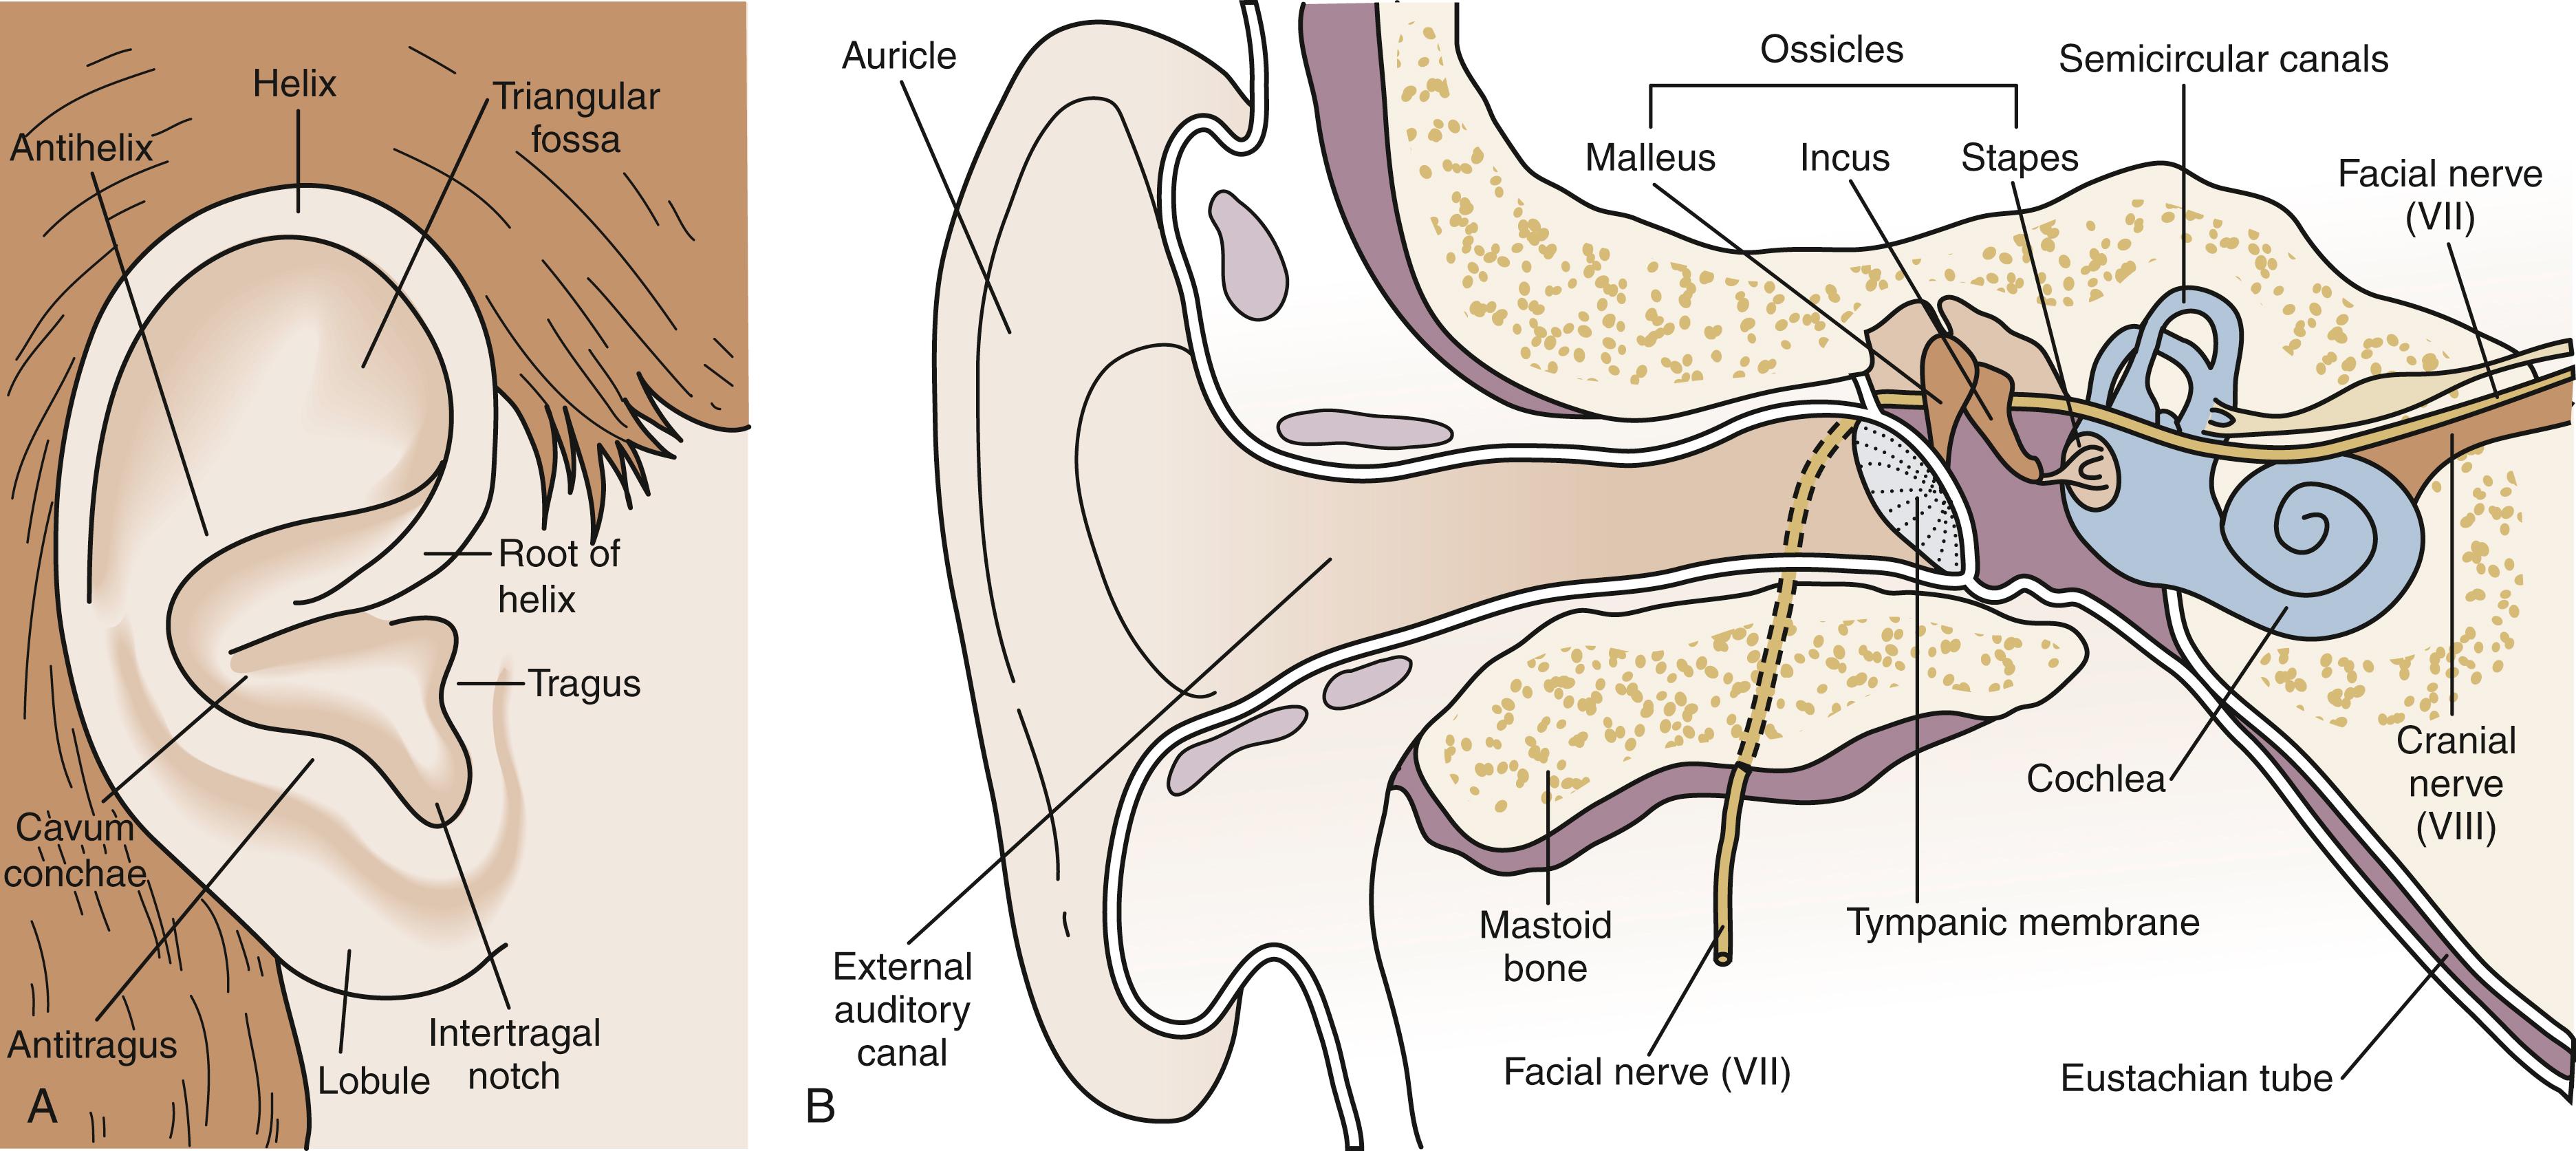 Fig. 24.2, Anatomy of the ear. (A) A normal external ear (auricle or pinna) is shown, with its various landmarks labeled. It is helpful to refer to such a diagram in assessing congenital anomalies. (B) Coronal section shows the various structures of the hearing and vestibular apparatus. The three main regions are the external ear, middle ear, and inner ear. The eustachian tube connects the middle ear and the nasopharynx and serves to drain and ventilate the middle ear.